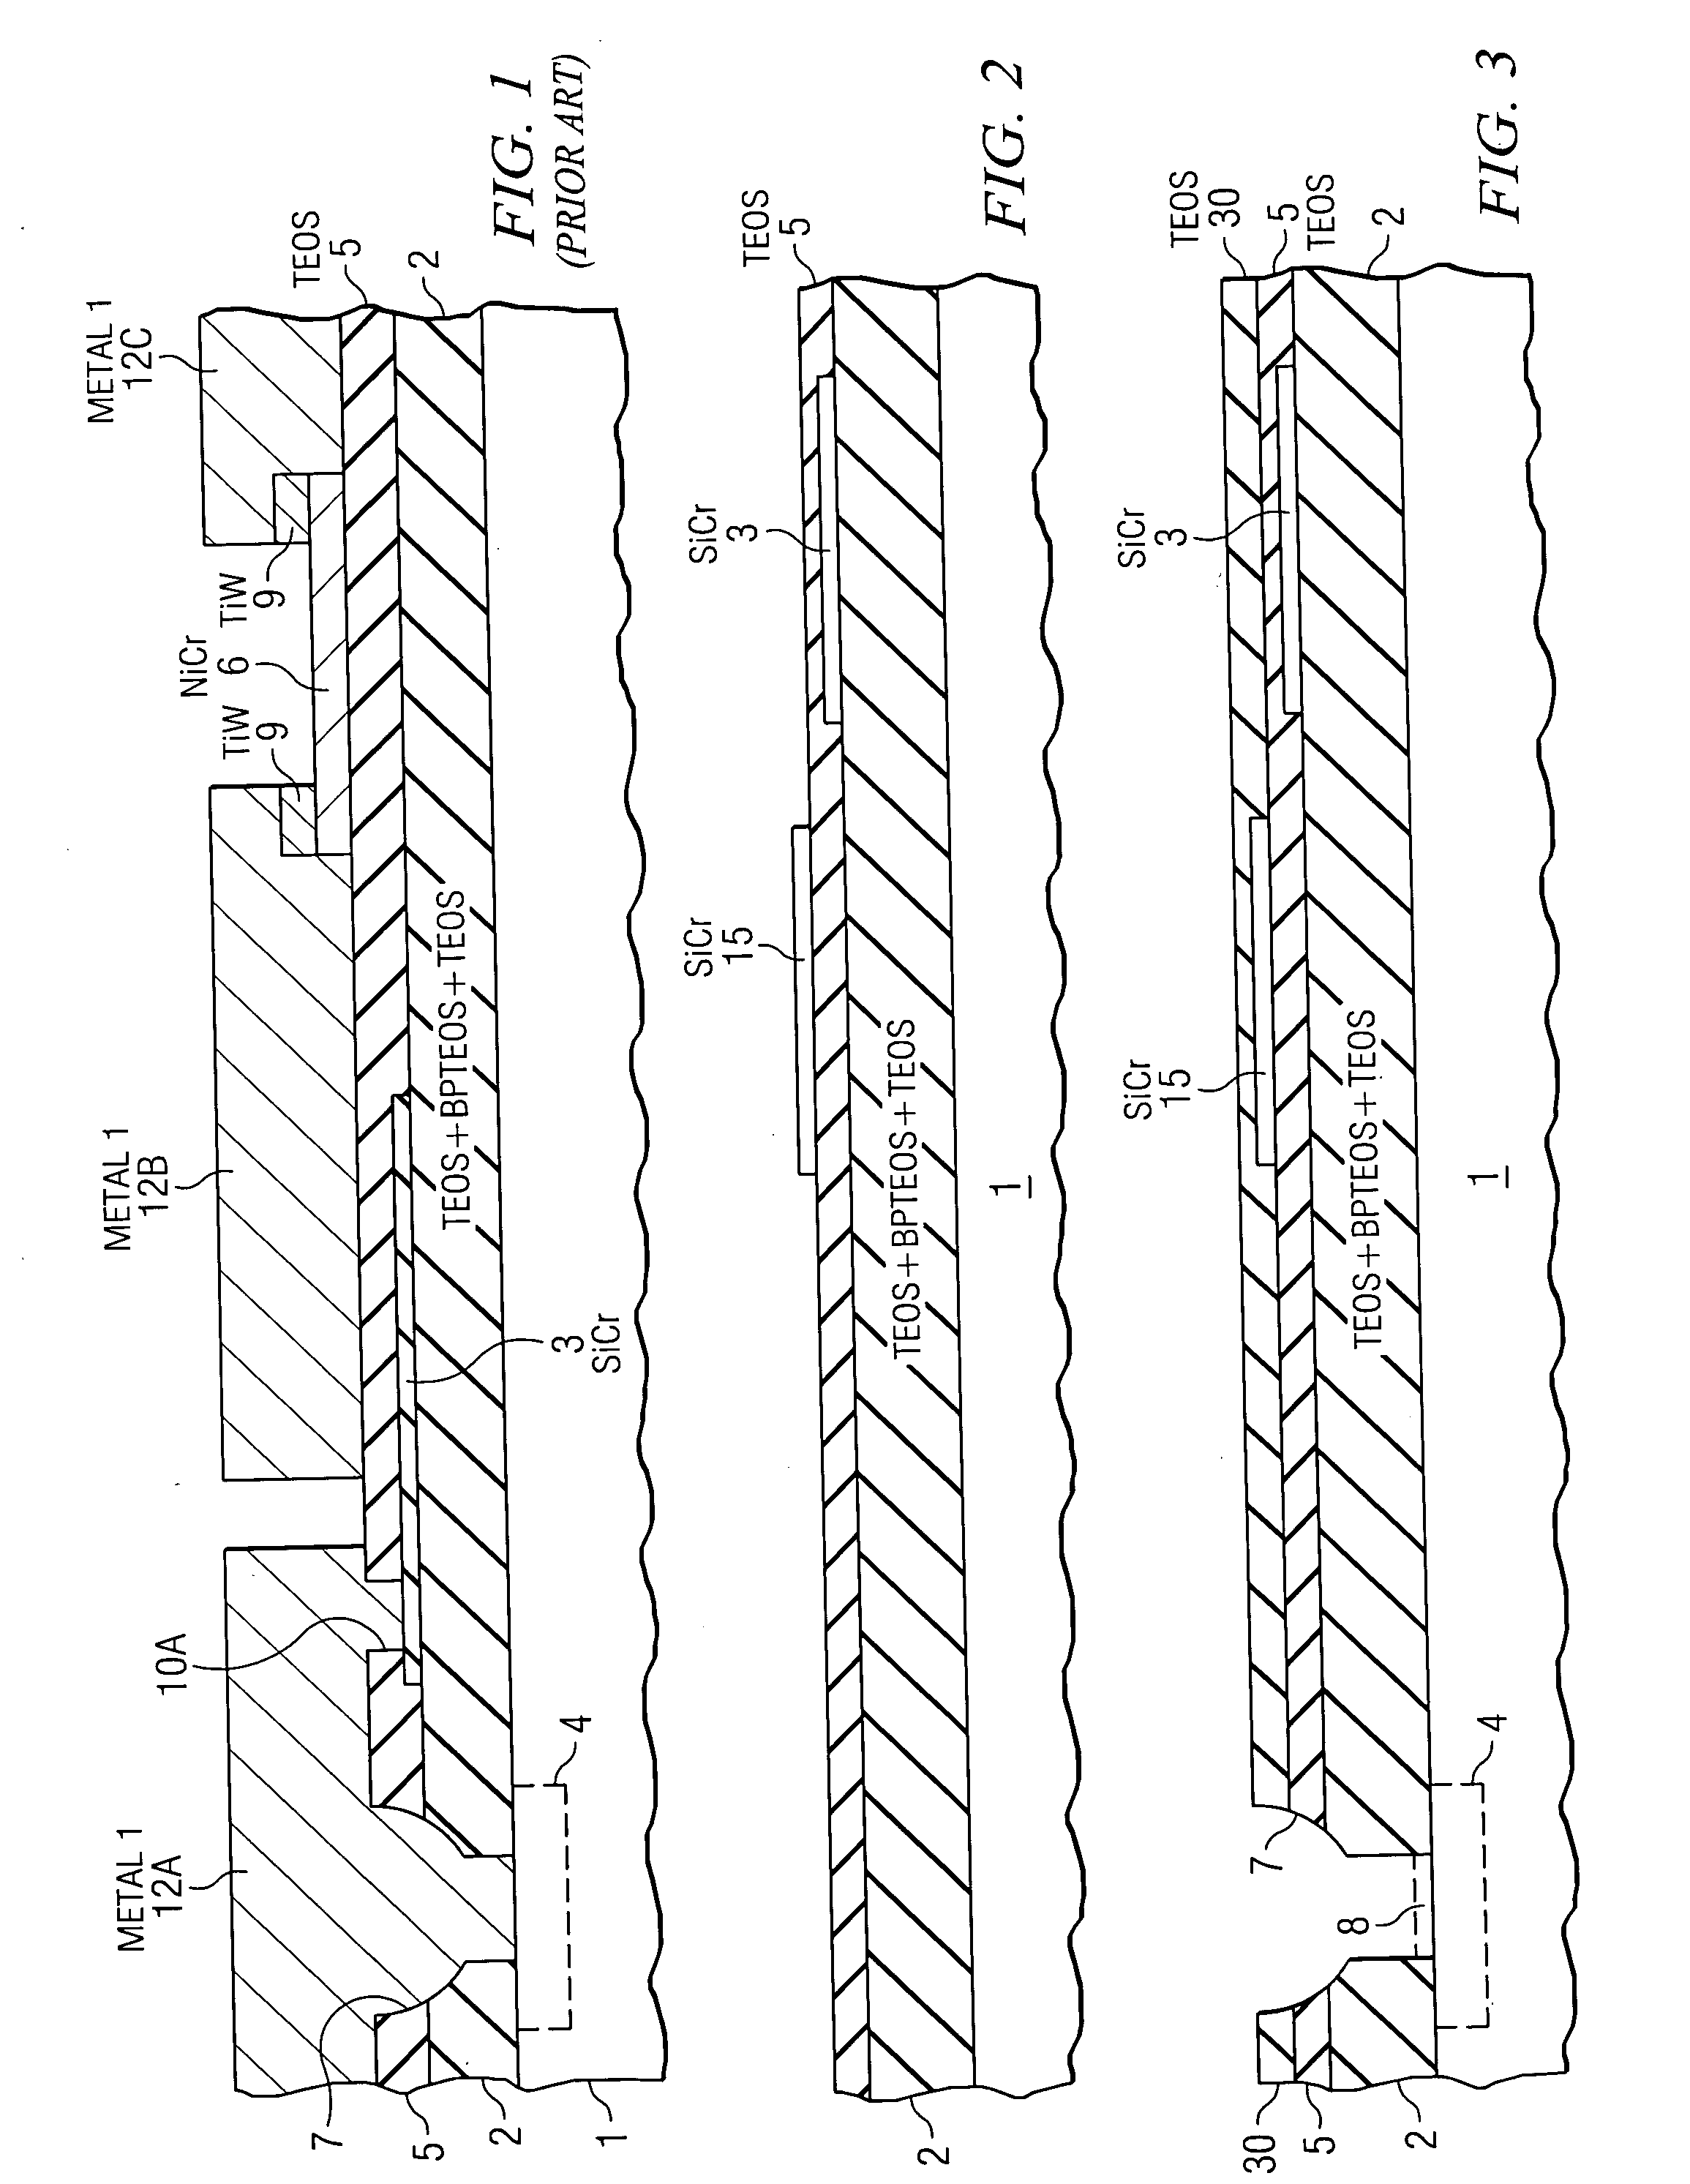 Back end thin film capacitor having both plates of thin film resistor material at single metallization layer